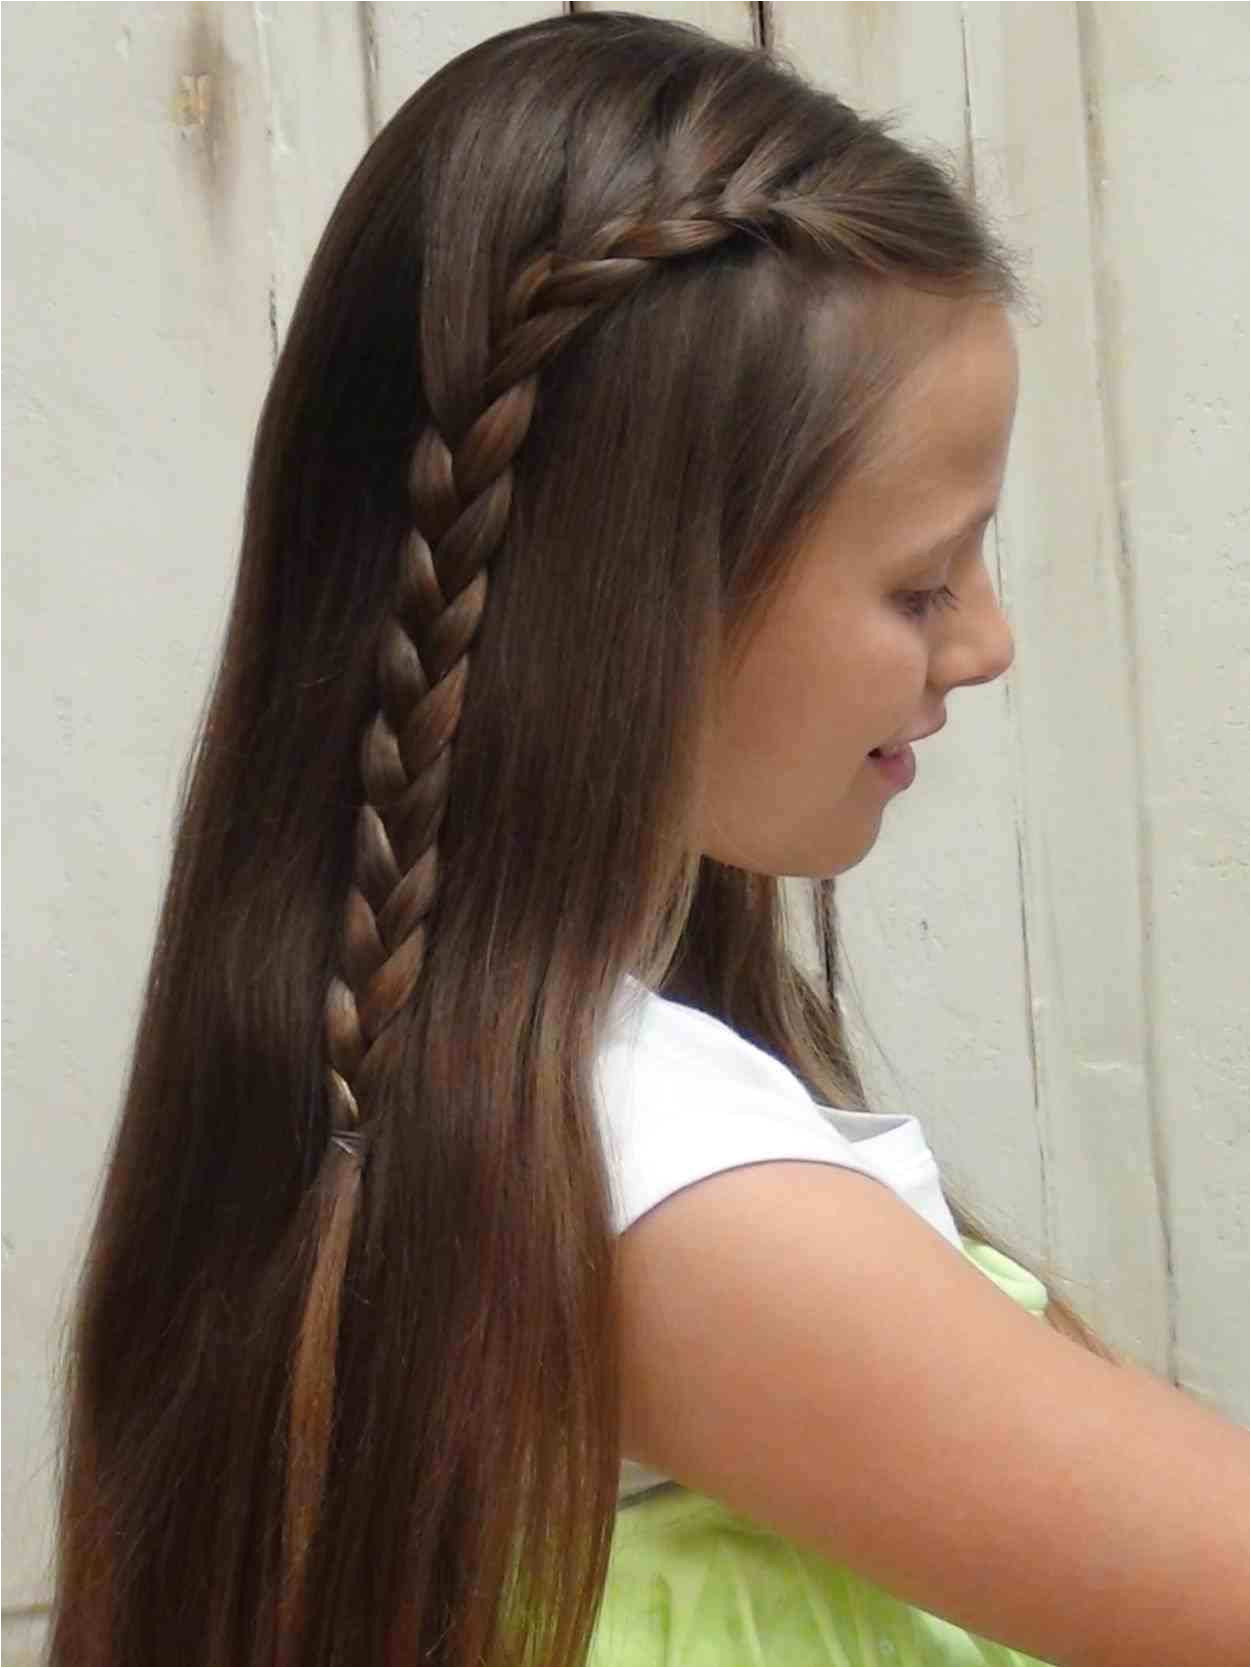 Cute Girl Hairstyles French Braid Awesome How To French Braid Short Hair Stock Easy Do It